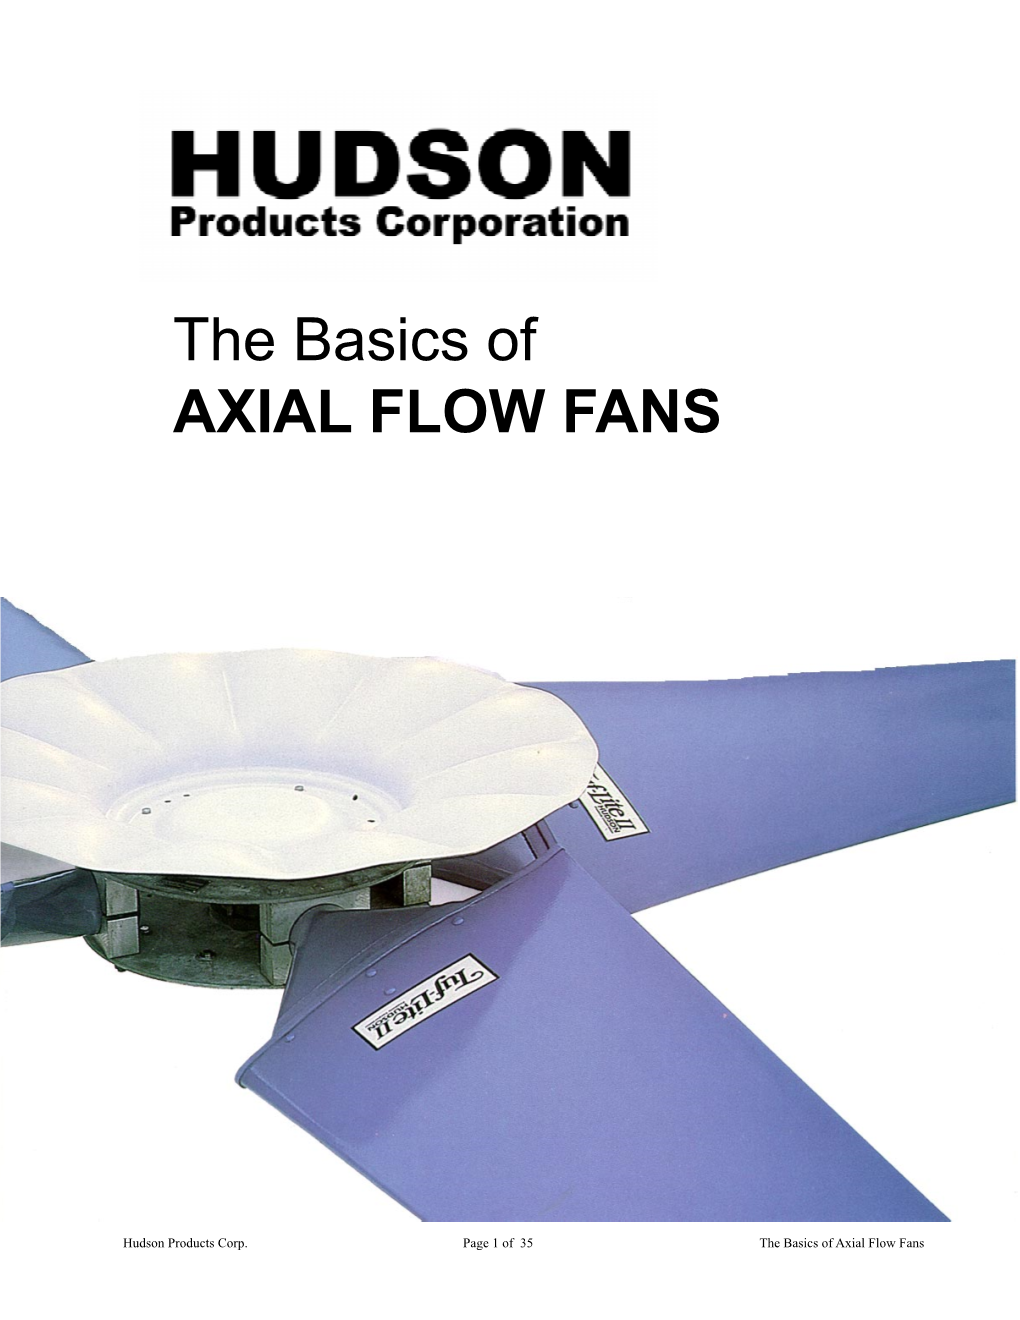 The Basics of AXIAL FLOW FANS